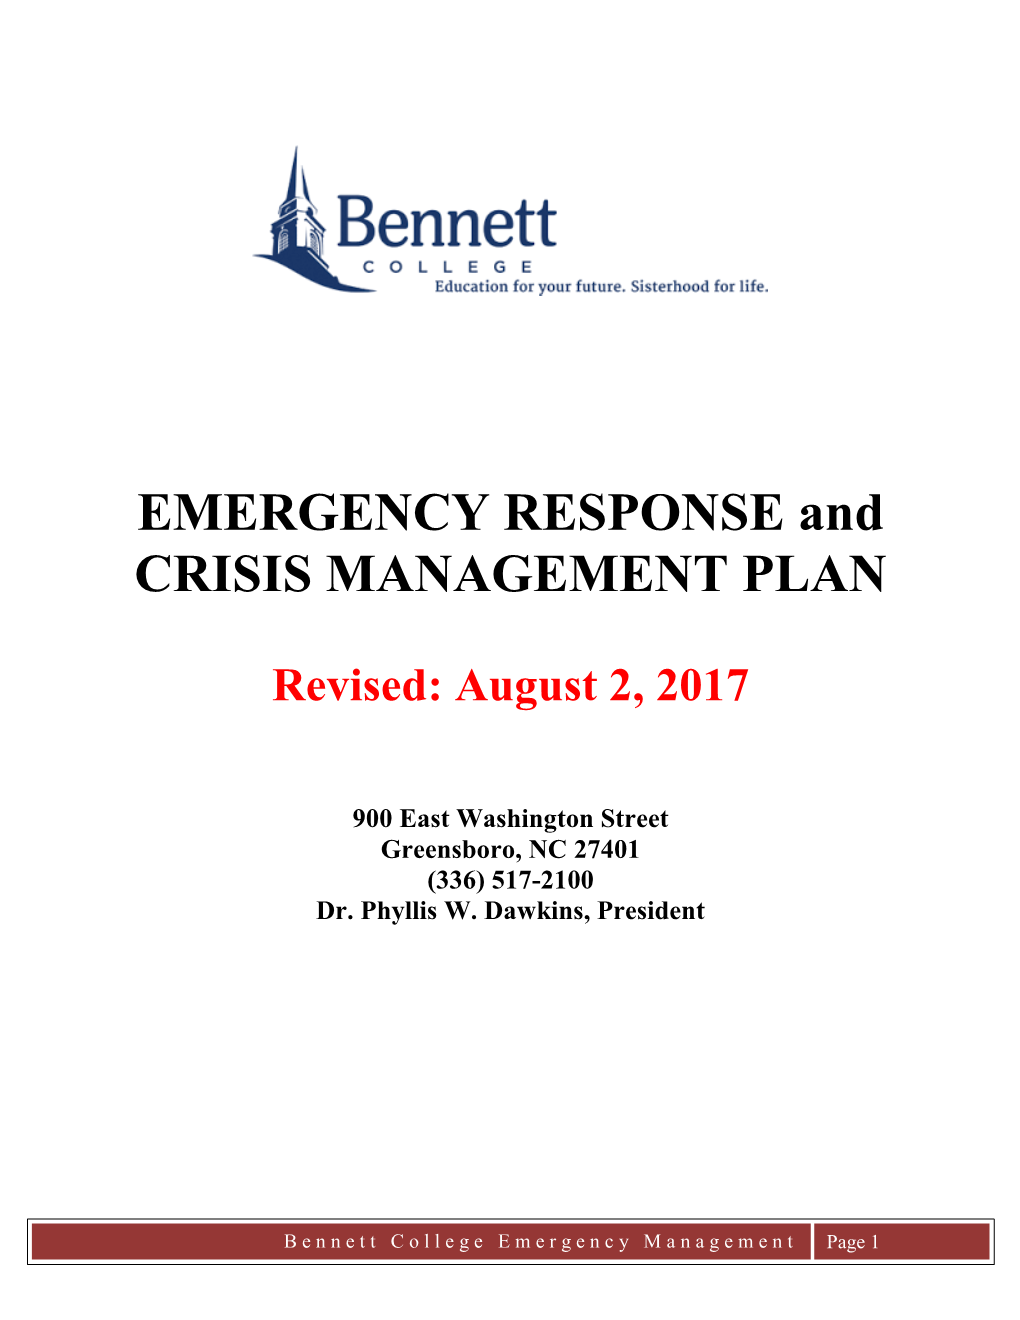 EMERGENCY RESPONSE and CRISIS MANAGEMENT PLAN